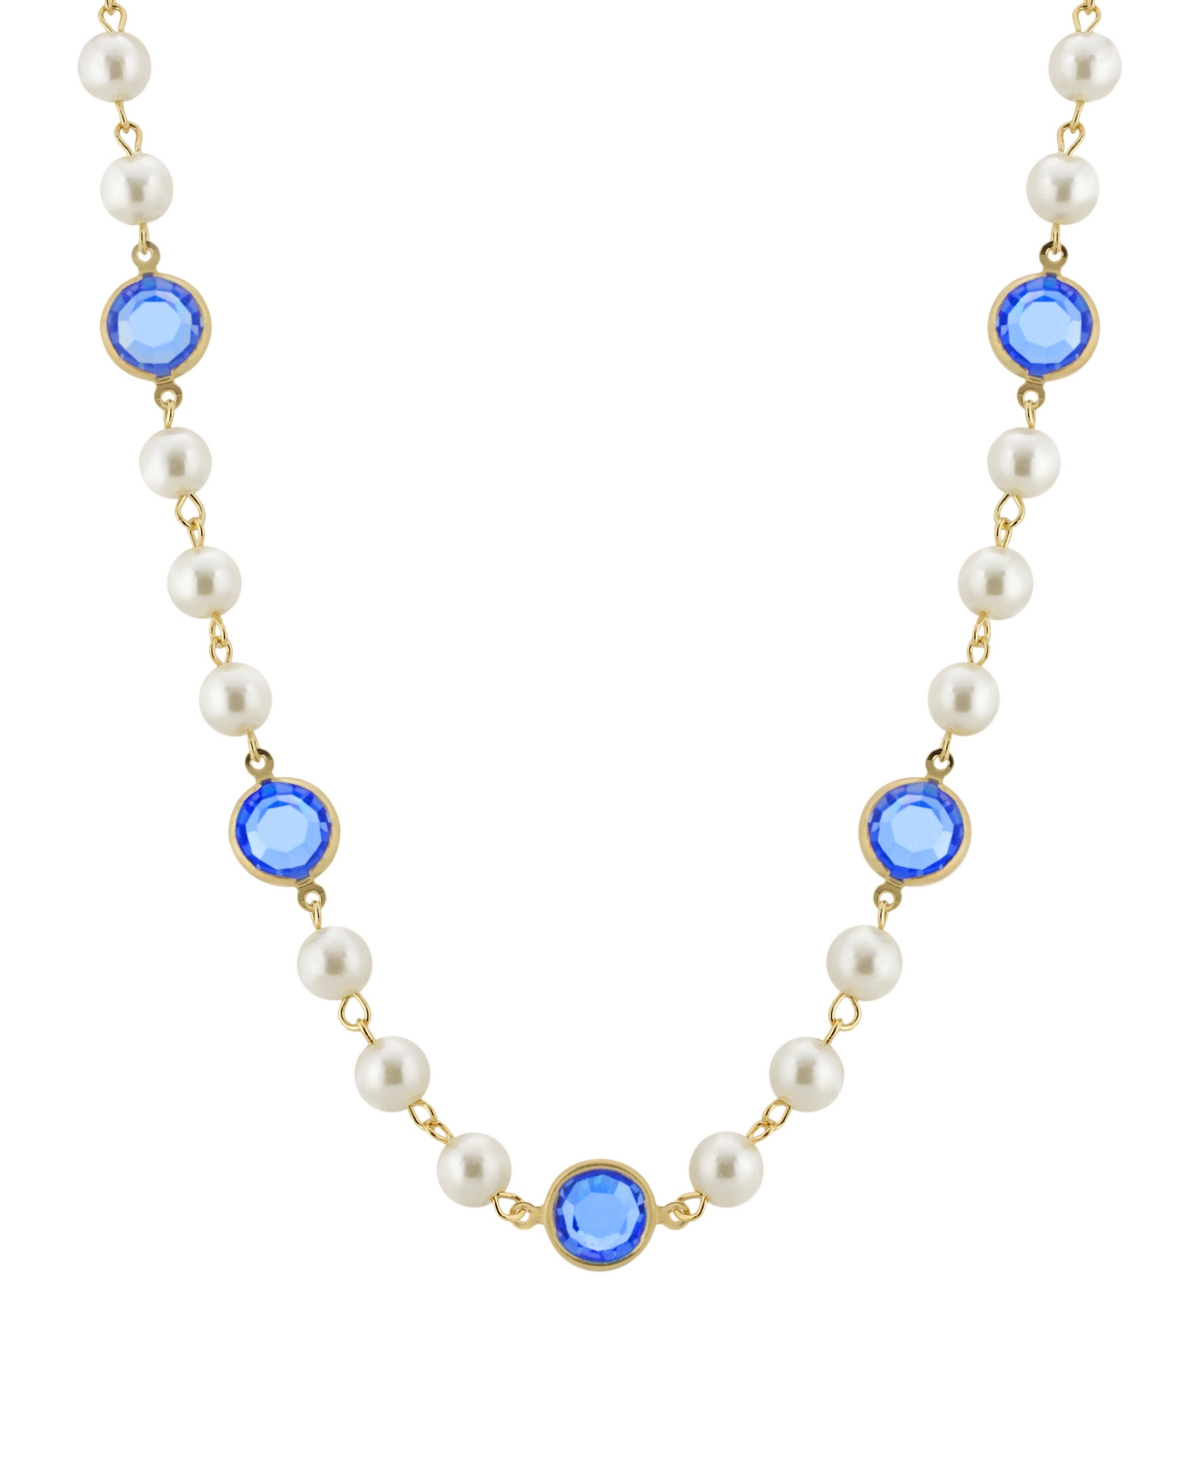 2028 Gold-tone Imitation Pearl With Blue Channels 16" Adjustable Necklace